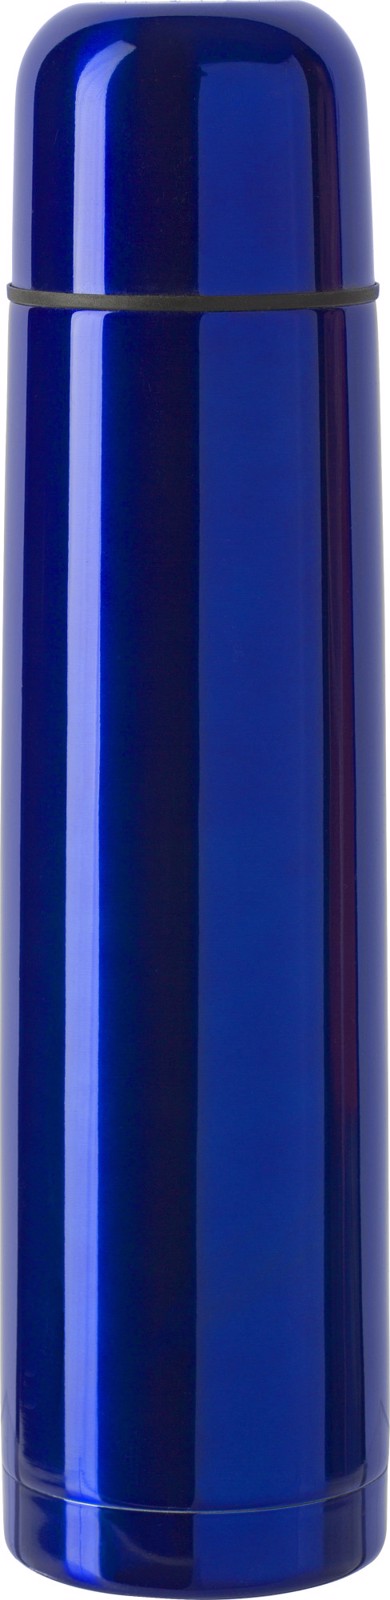 Stainless steel double walled flask - Cobalt Blue